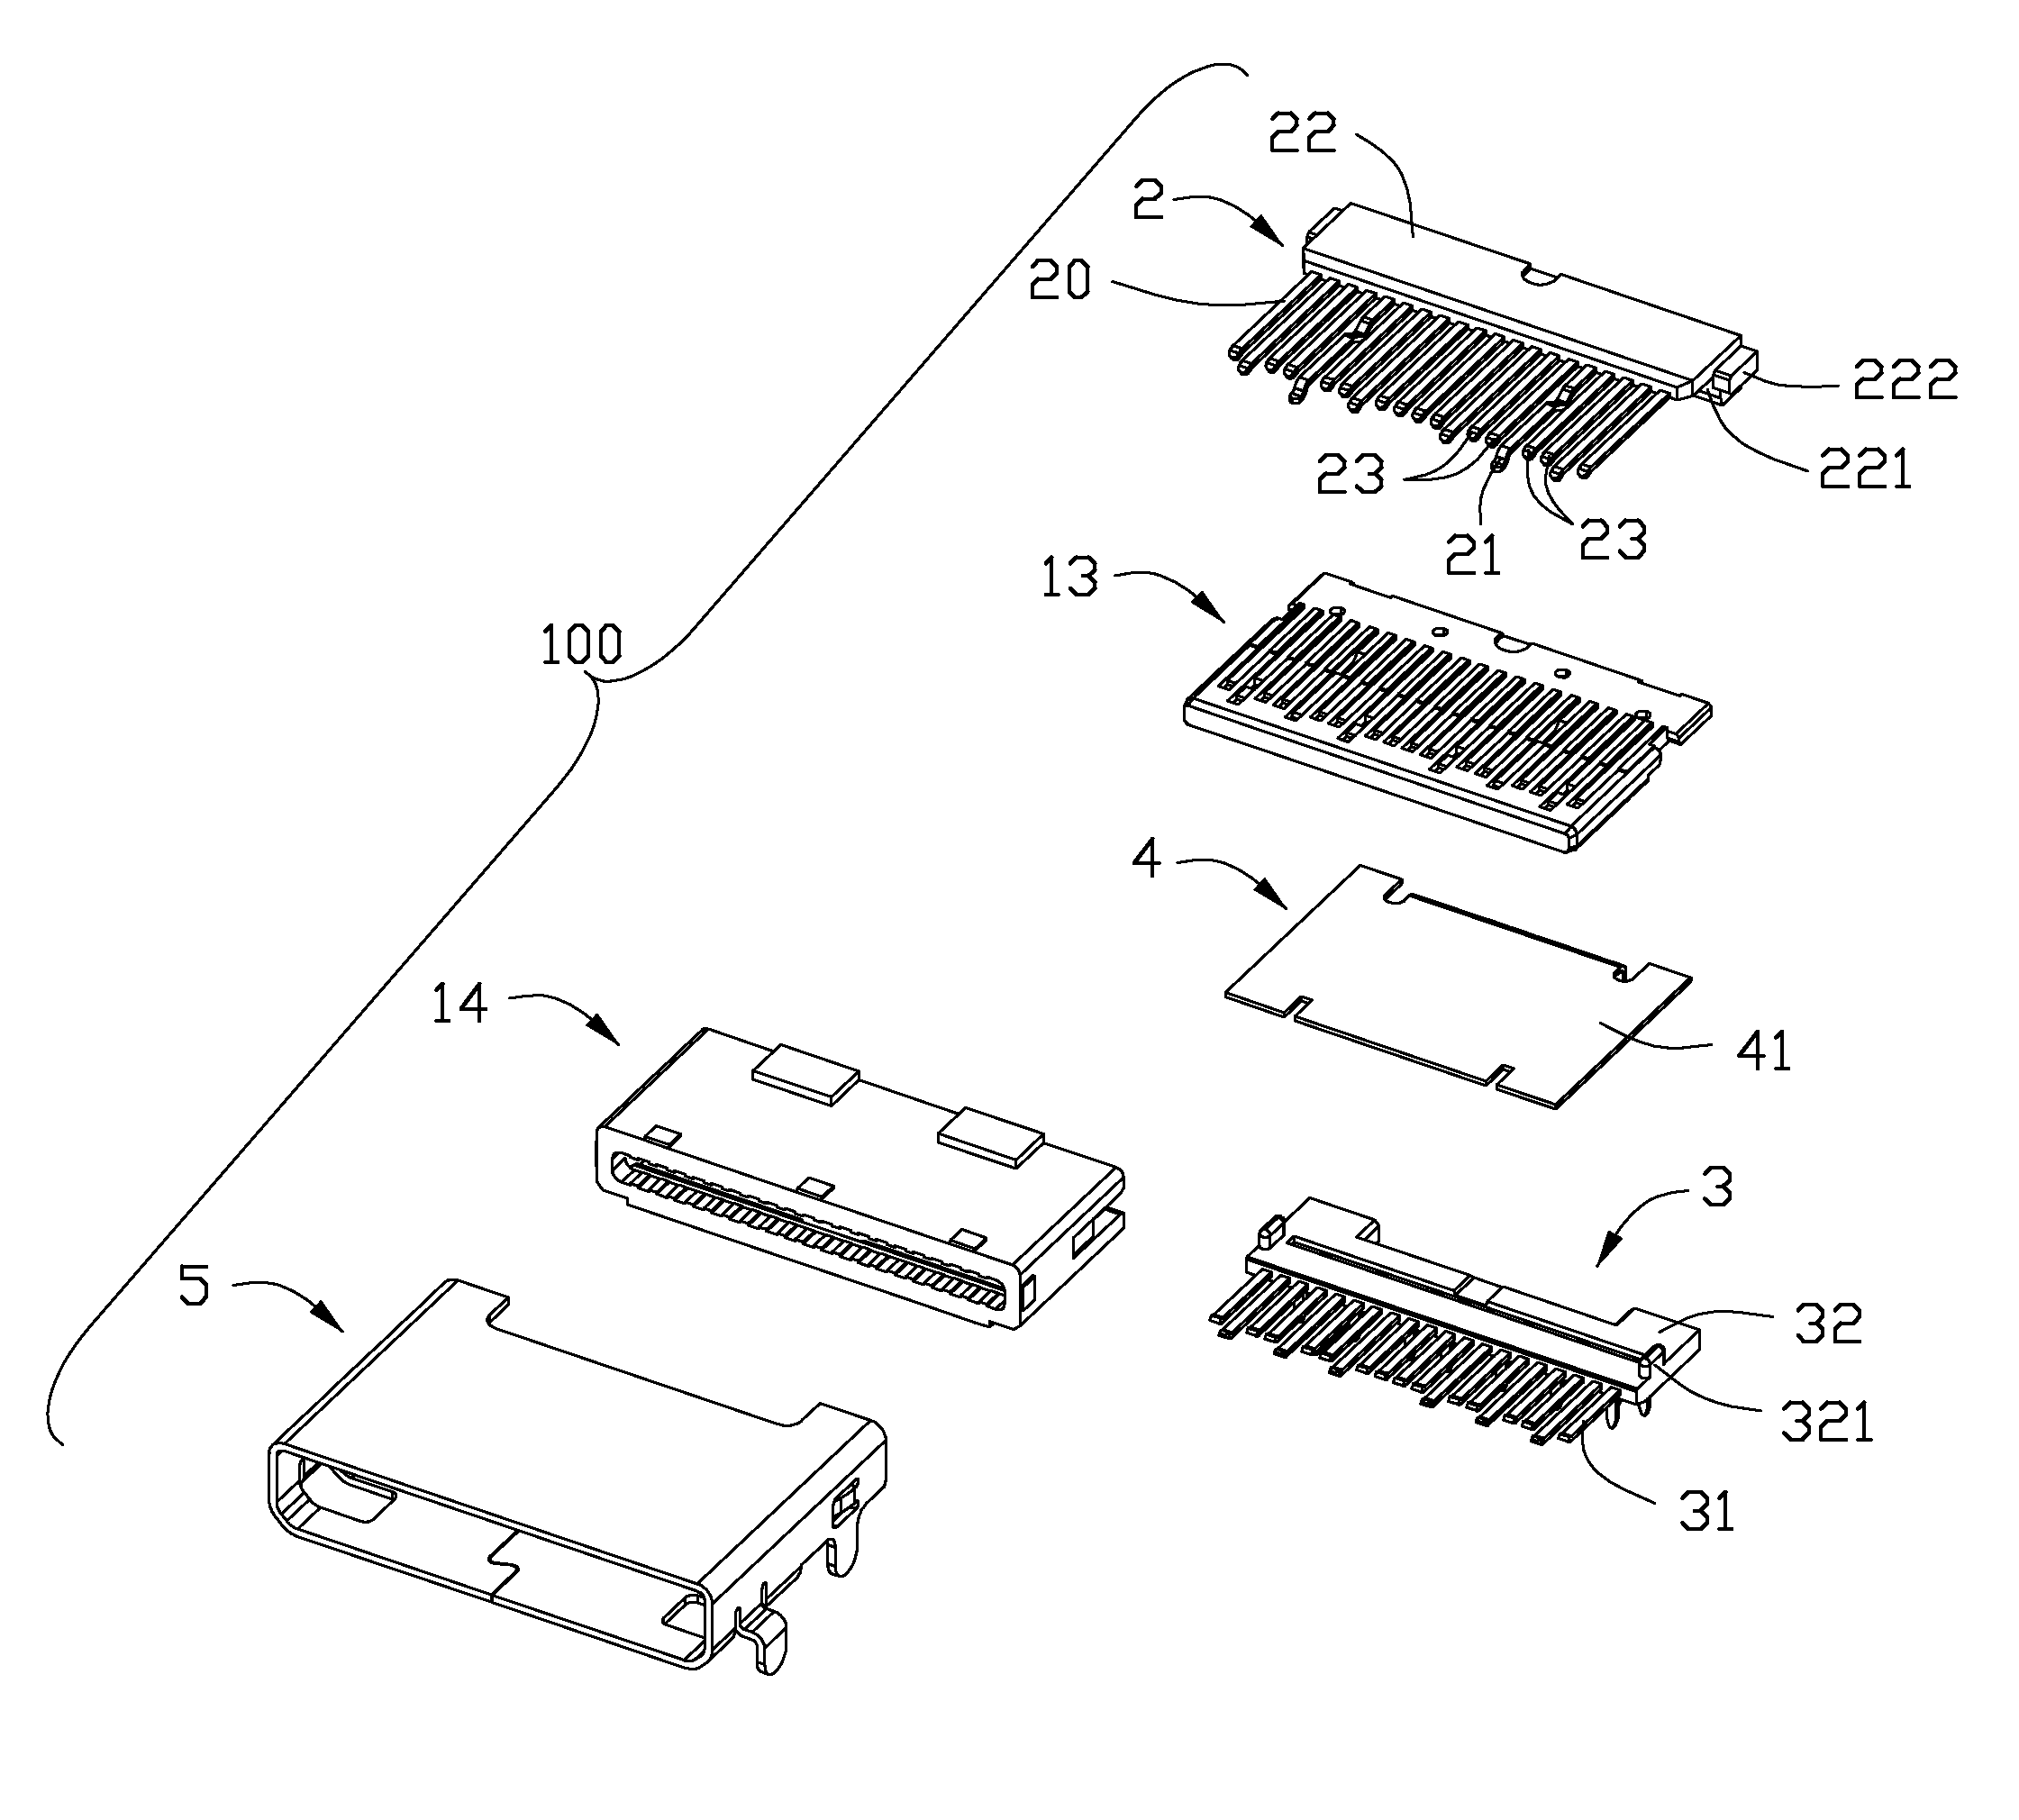 Electrical connector used for transmitting high frequency signals